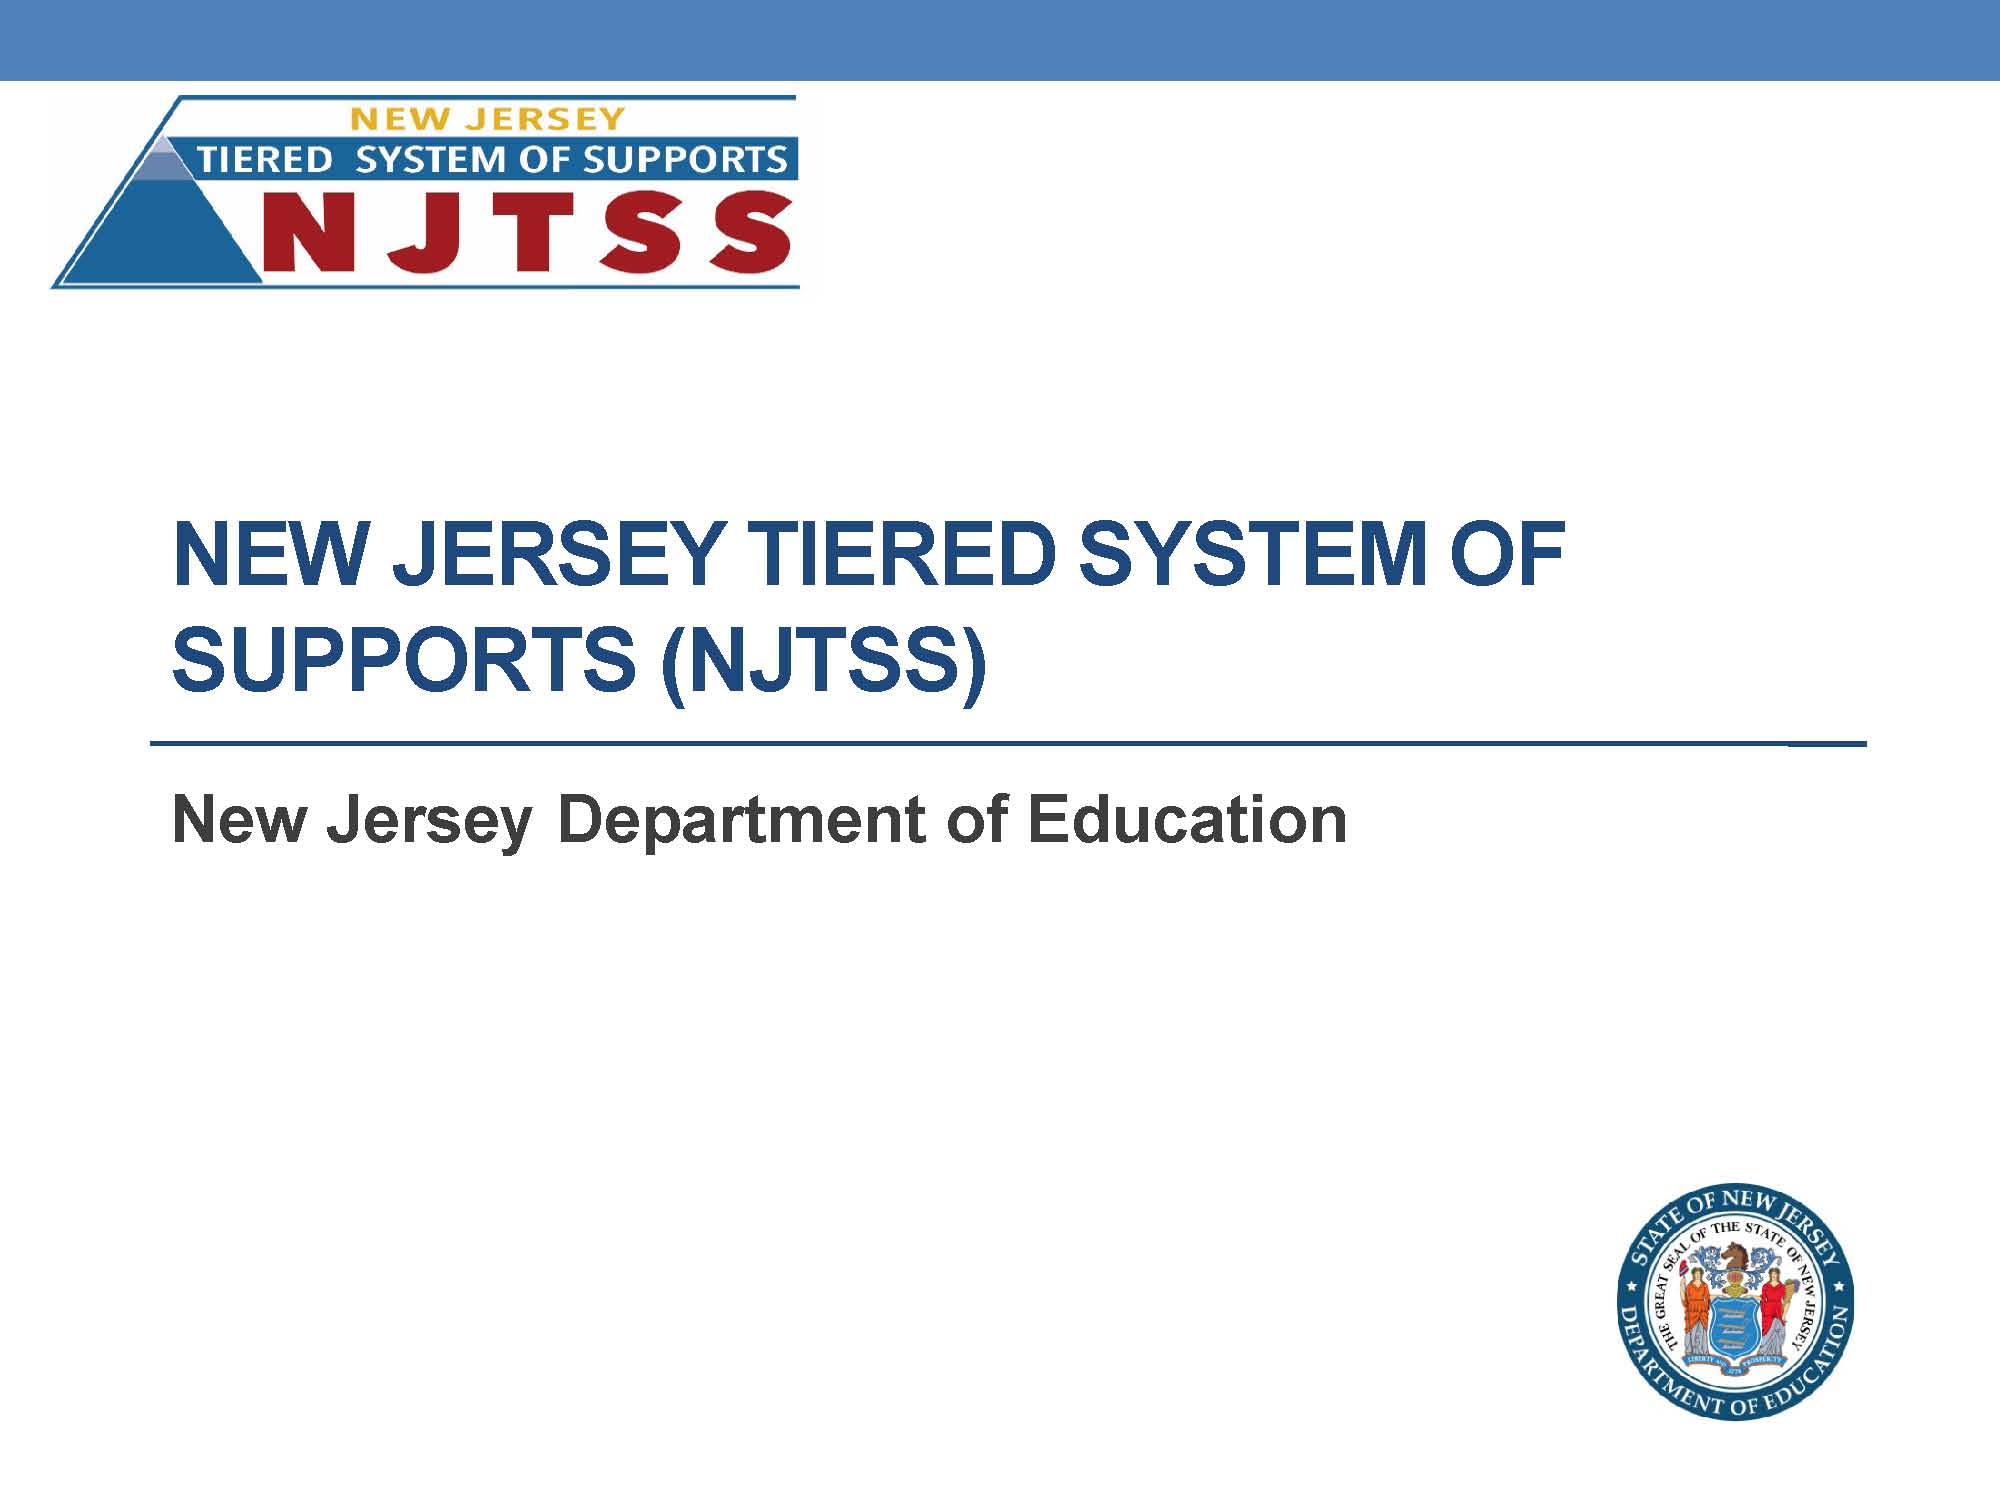 NJTSS New Jersey Tiered System of Supports (NJTSS) - New Jersey Department of Education